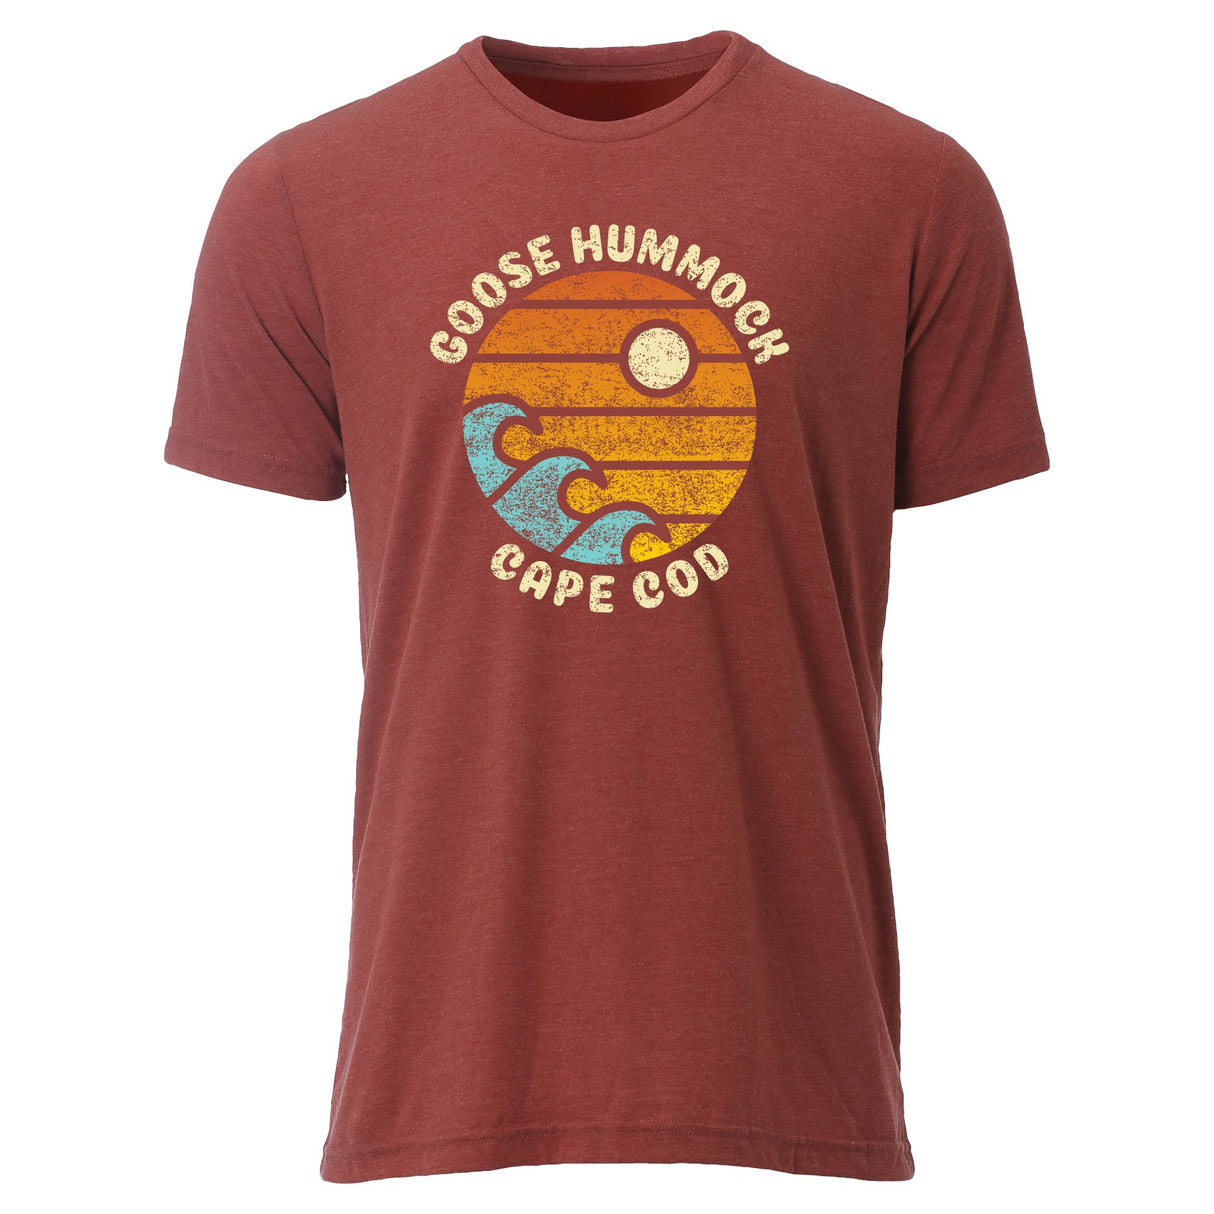 OURAY GH SUNSET CIRCLE TRI BLEND SS TEE